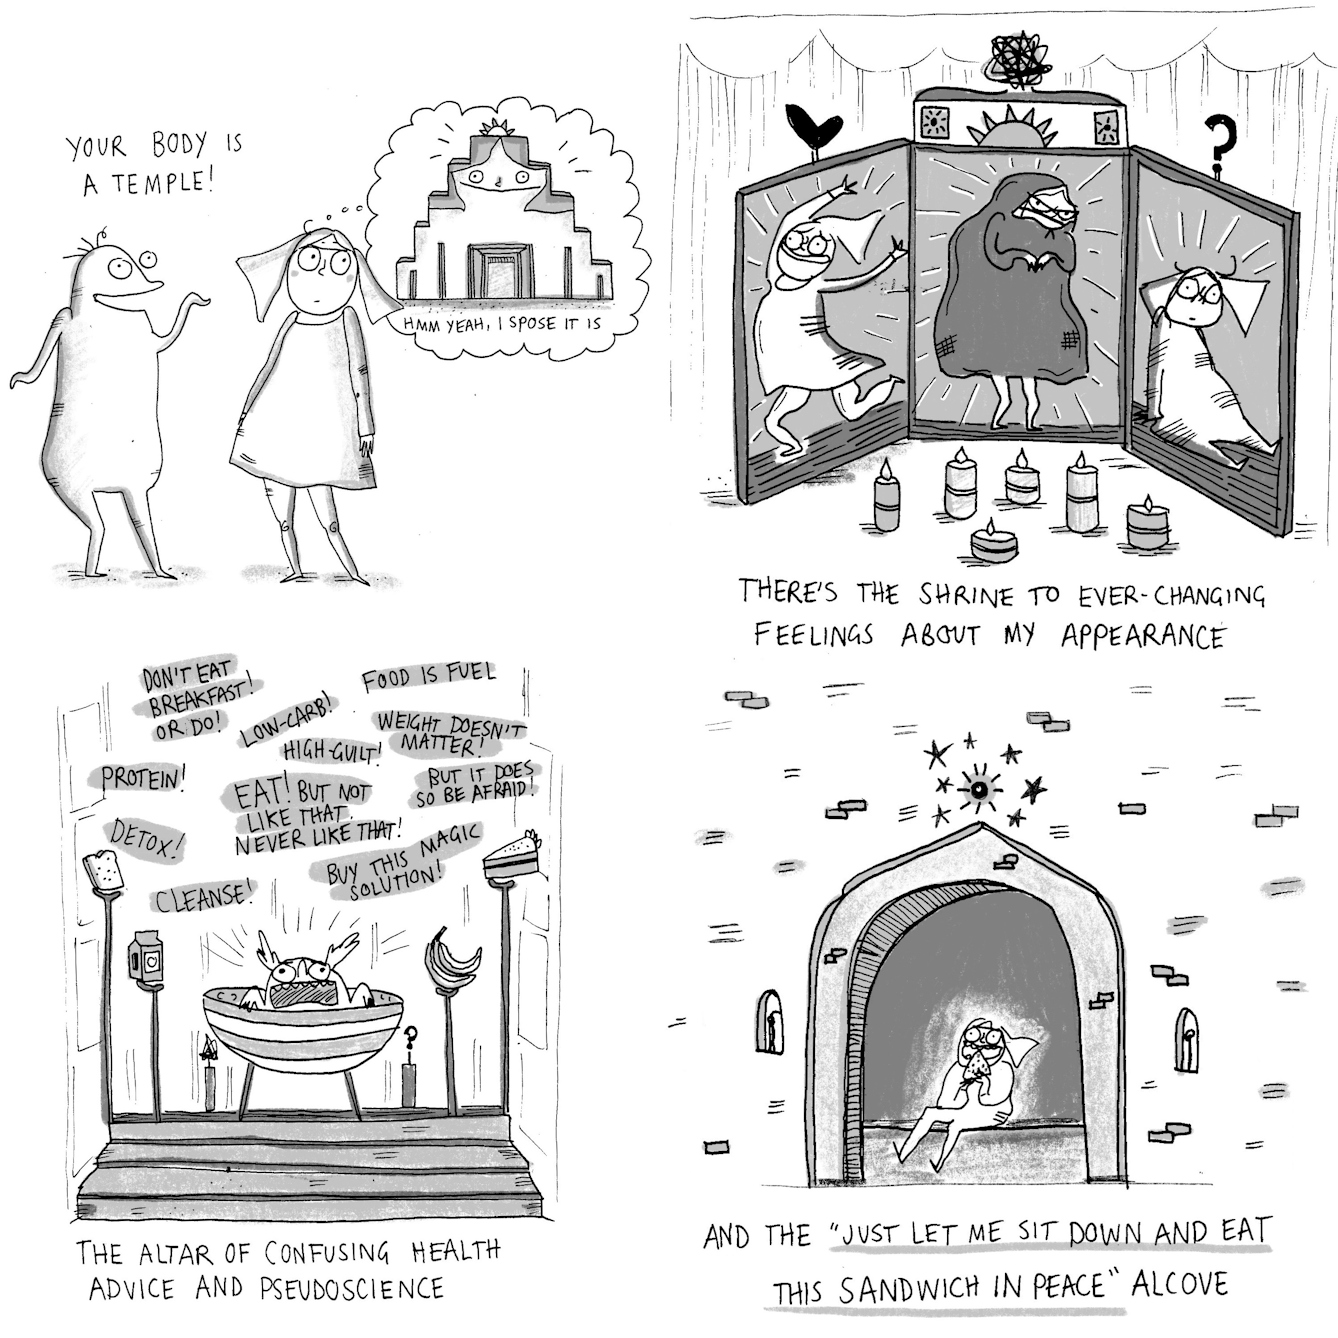 Web comic comprising four panels showing how the human body is a temple, a shrine to every feeling about your appearance, alters of confusing health advice and a place  to sit down and eat a sandwich in peace. 